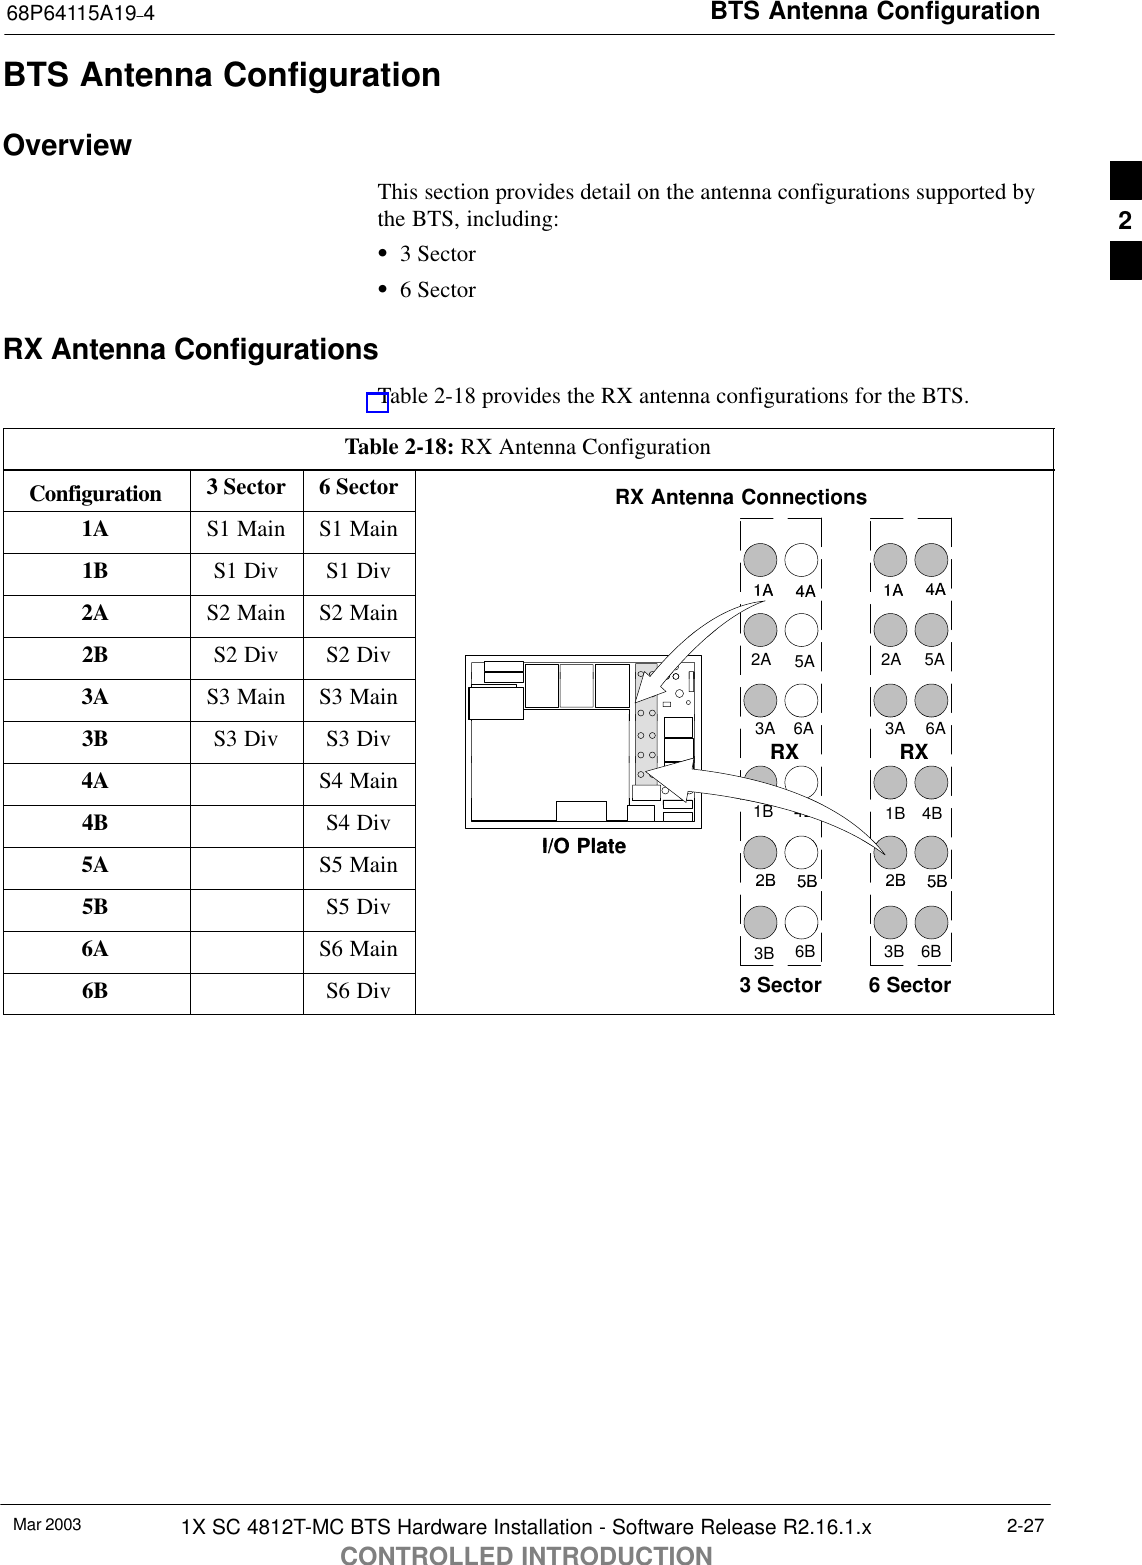 BTS Antenna Configuration68P64115A19–4Mar 2003 1X SC 4812T-MC BTS Hardware Installation - Software Release R2.16.1.xCONTROLLED INTRODUCTION2-27BTS Antenna ConfigurationOverviewThis section provides detail on the antenna configurations supported bythe BTS, including:S3 SectorS6 SectorRX Antenna ConfigurationsTable 2-18 provides the RX antenna configurations for the BTS.Table 2-18: RX Antenna ConfigurationConfiguration 3 Sector 6 Sector RX Antenna Connections1A S1 Main S1 MainRX Antenna Connections1B S1 Div S1 Div1A 4A1A 4A2A S2 Main S2 Main1A 4A1A 4A2B S2 Div S2 Div 2A 5A2A 5A3A S3 Main S3 Main3B S3 Div S3 Div RX3A 6ARX3A 6A4A S4 MainRXRX4B S4 Div 1B 4B1B 4BI/O Plate5A S5 Main 2B 5B2B 5BI/O Plate5B S5 Div2B 5B2B 5B6A S6 Main 3B 6B3B 6B6B S6 Div 3 Sector 6 Sector2